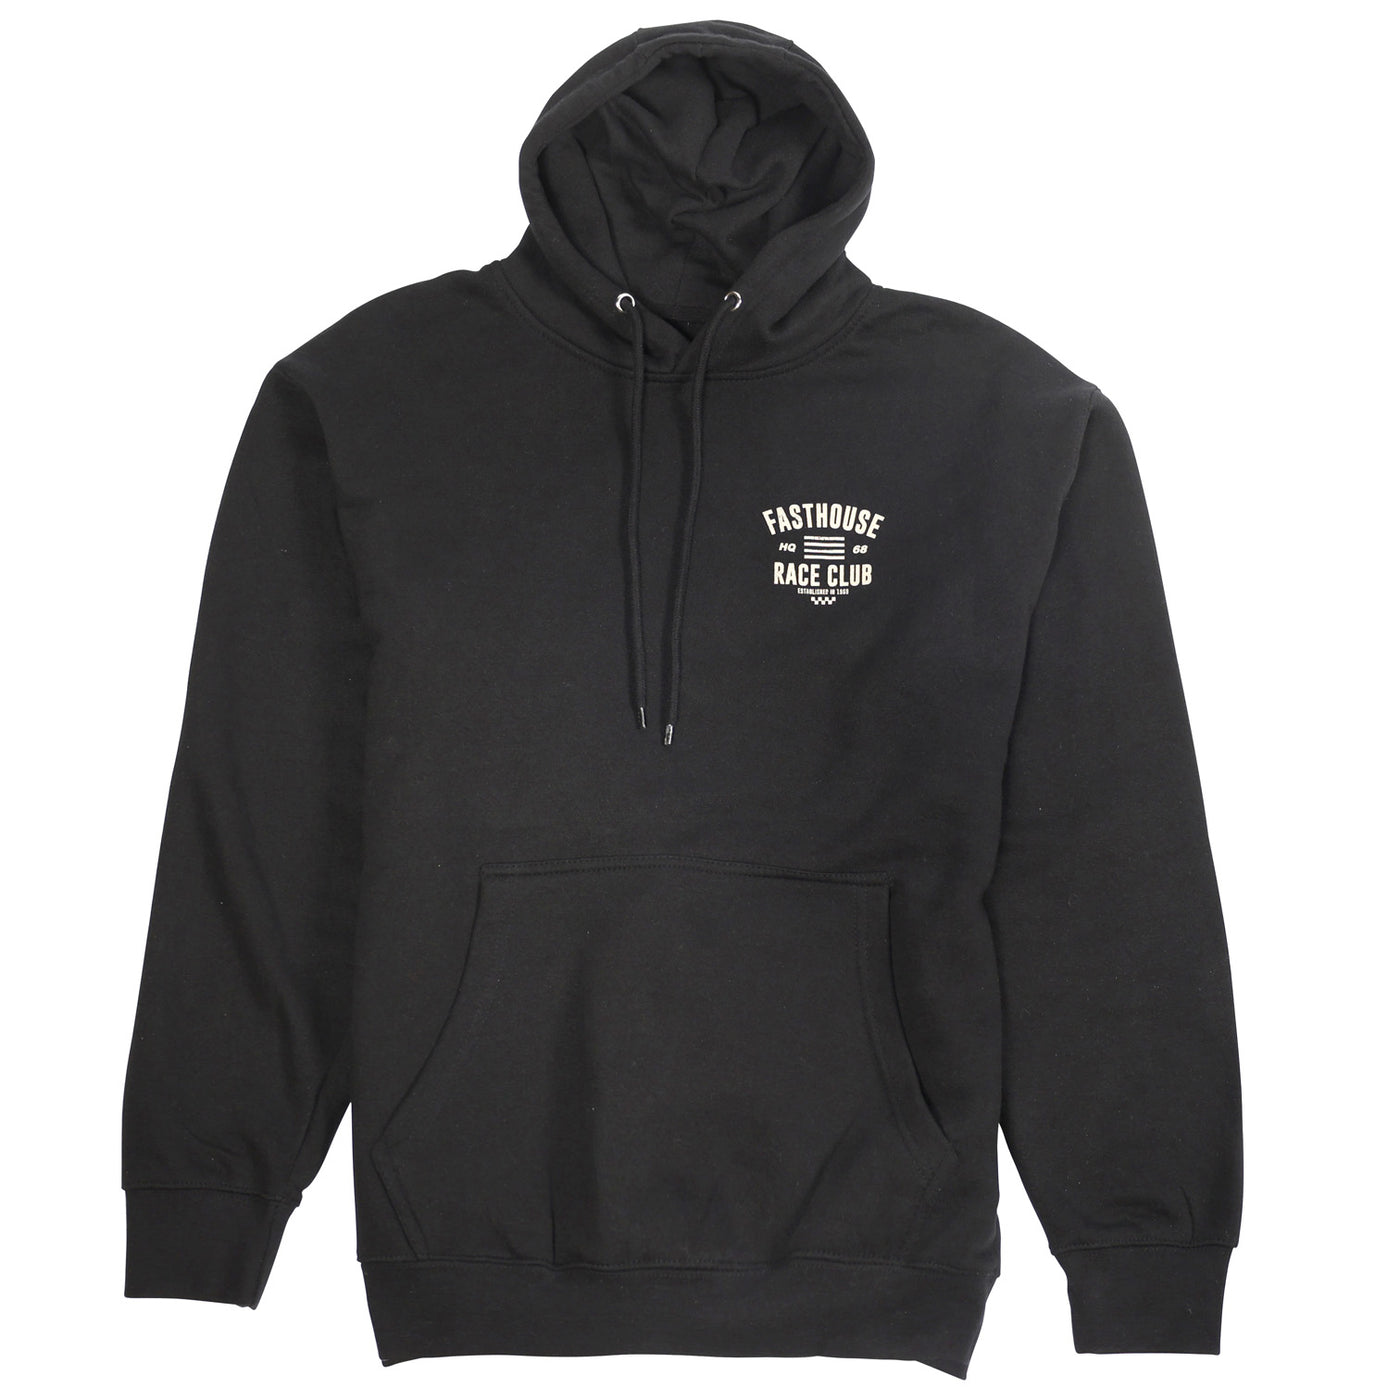 Fasthouse Resort HQ Club Hooded Pullover